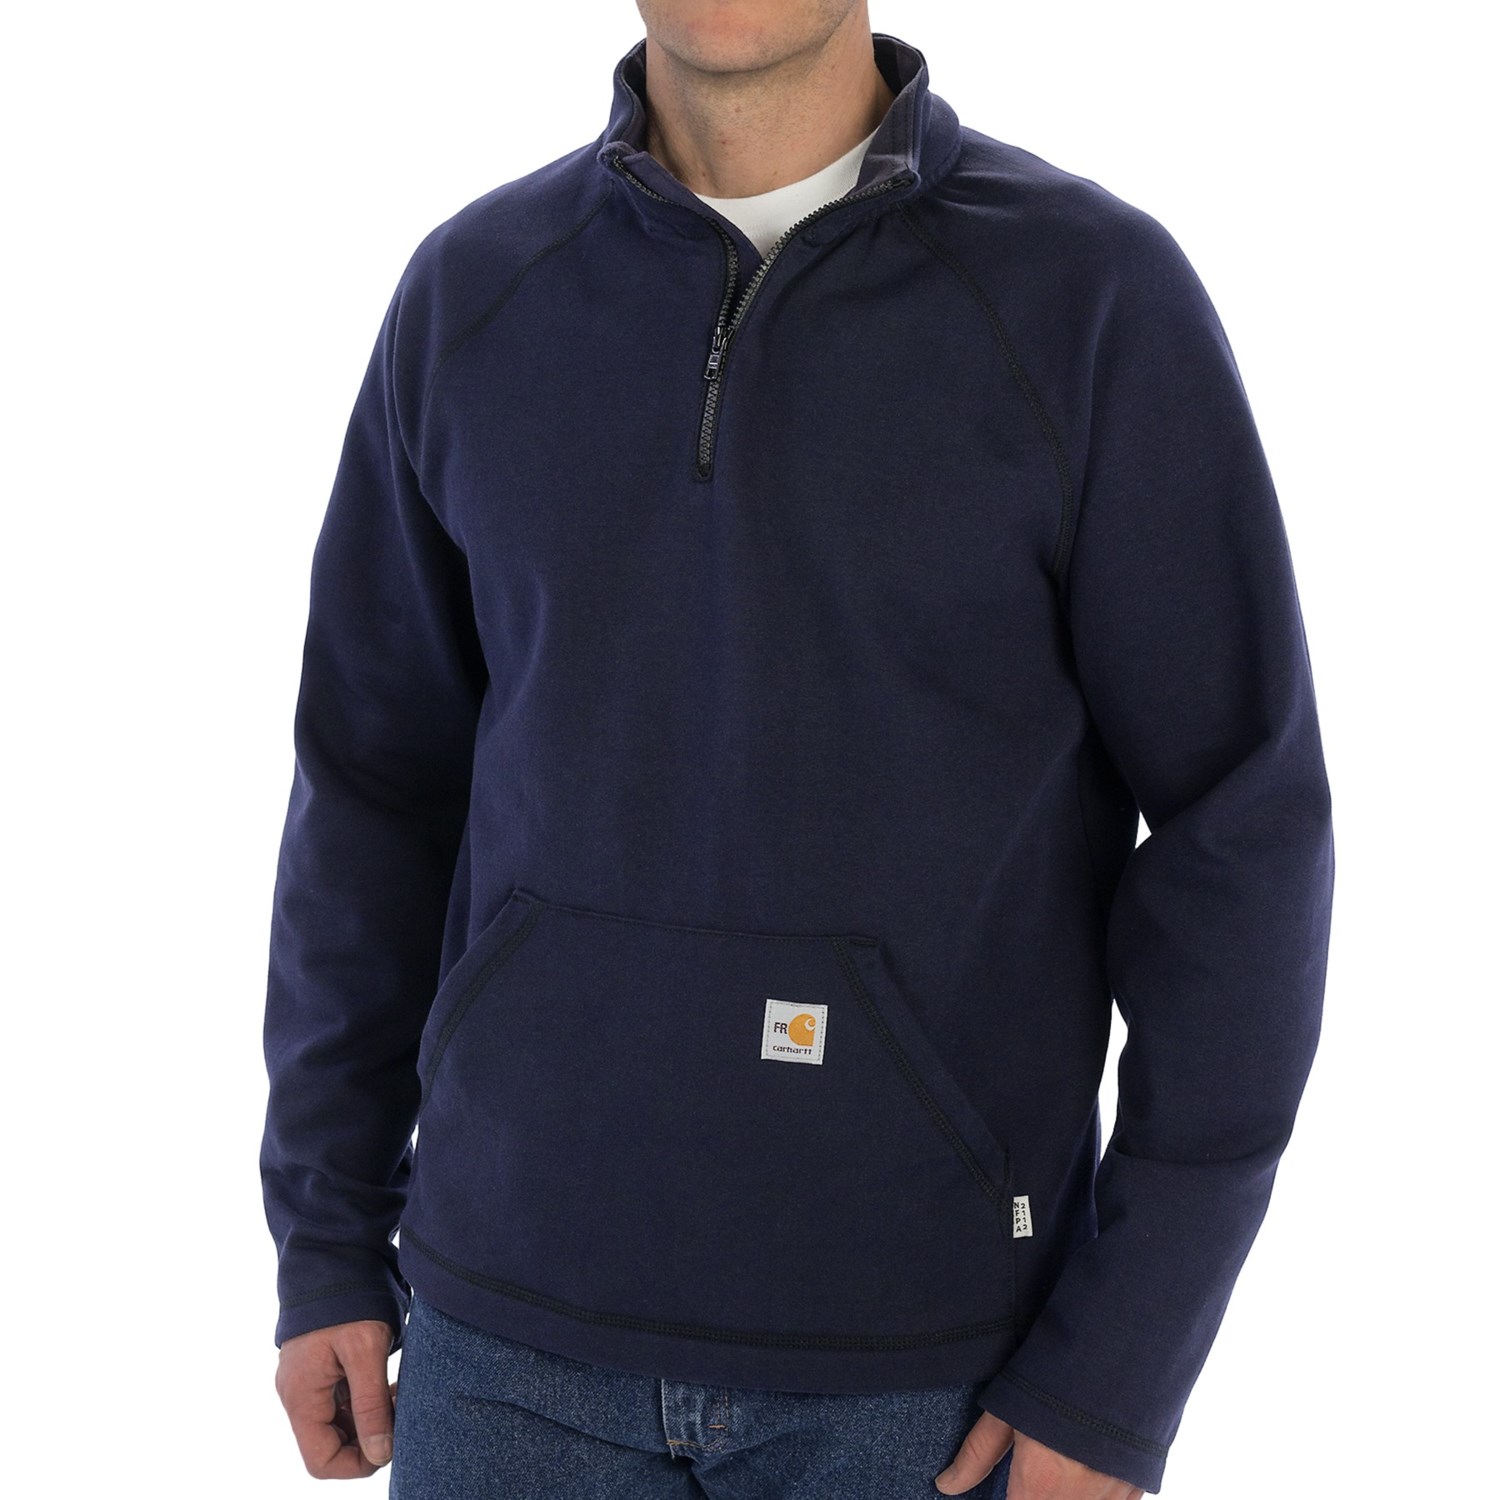 Carhartt Flame-Resistant Force Fleece Jacket (For Big and Tall Men)